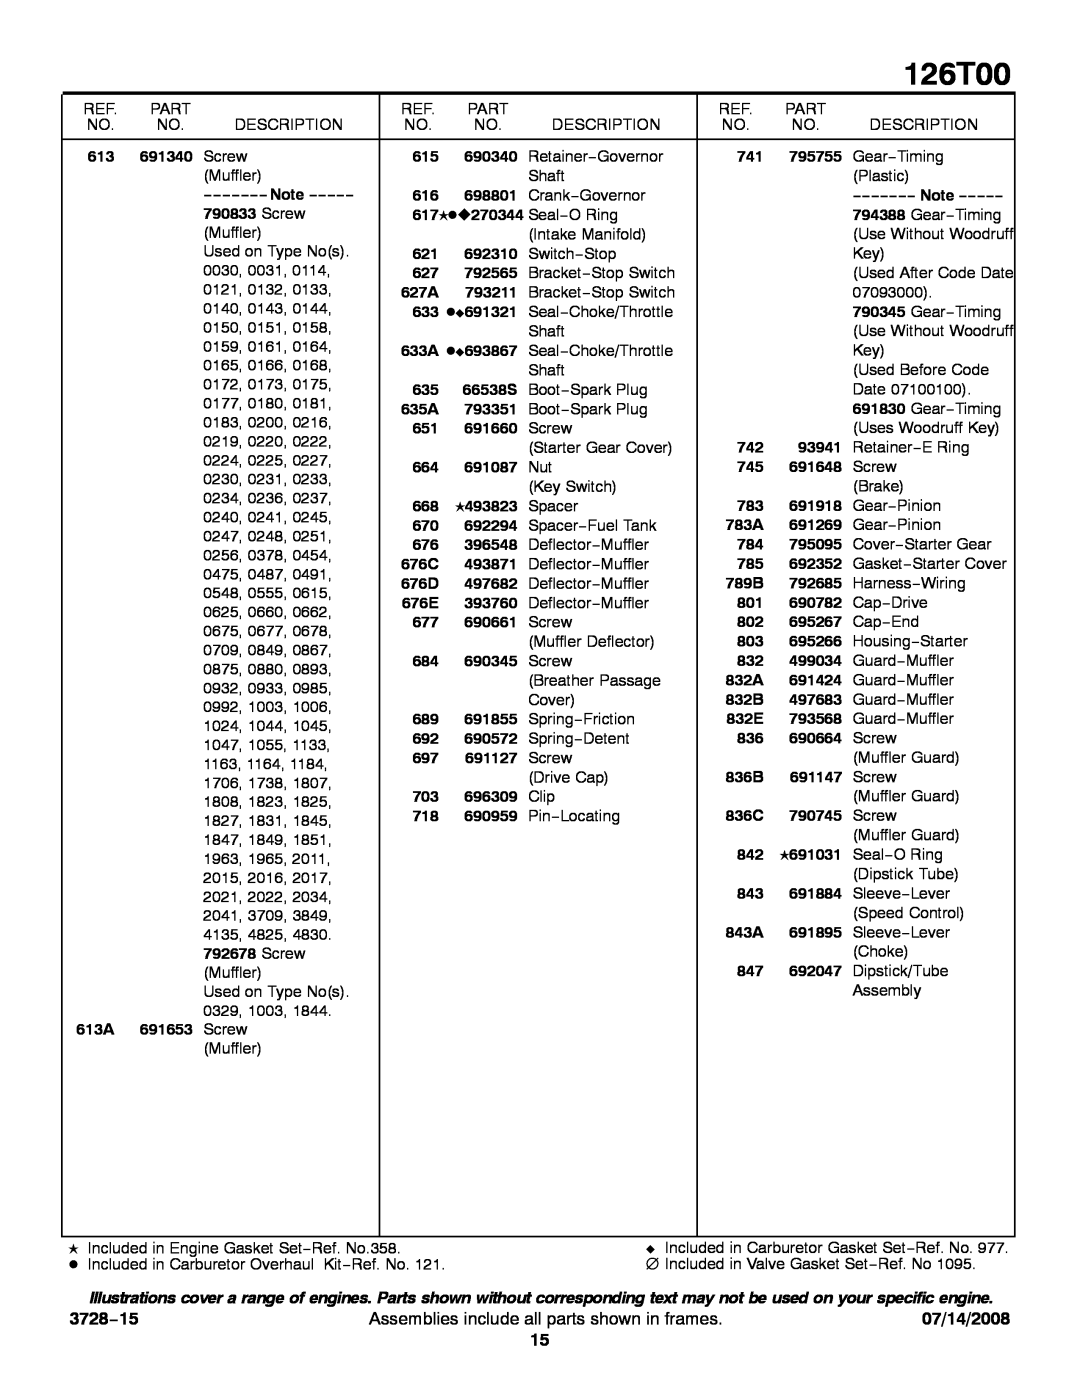 Snapper 126T00 service manual 3728−15, Assemblies include all parts shown in frames, 07/14/2008 